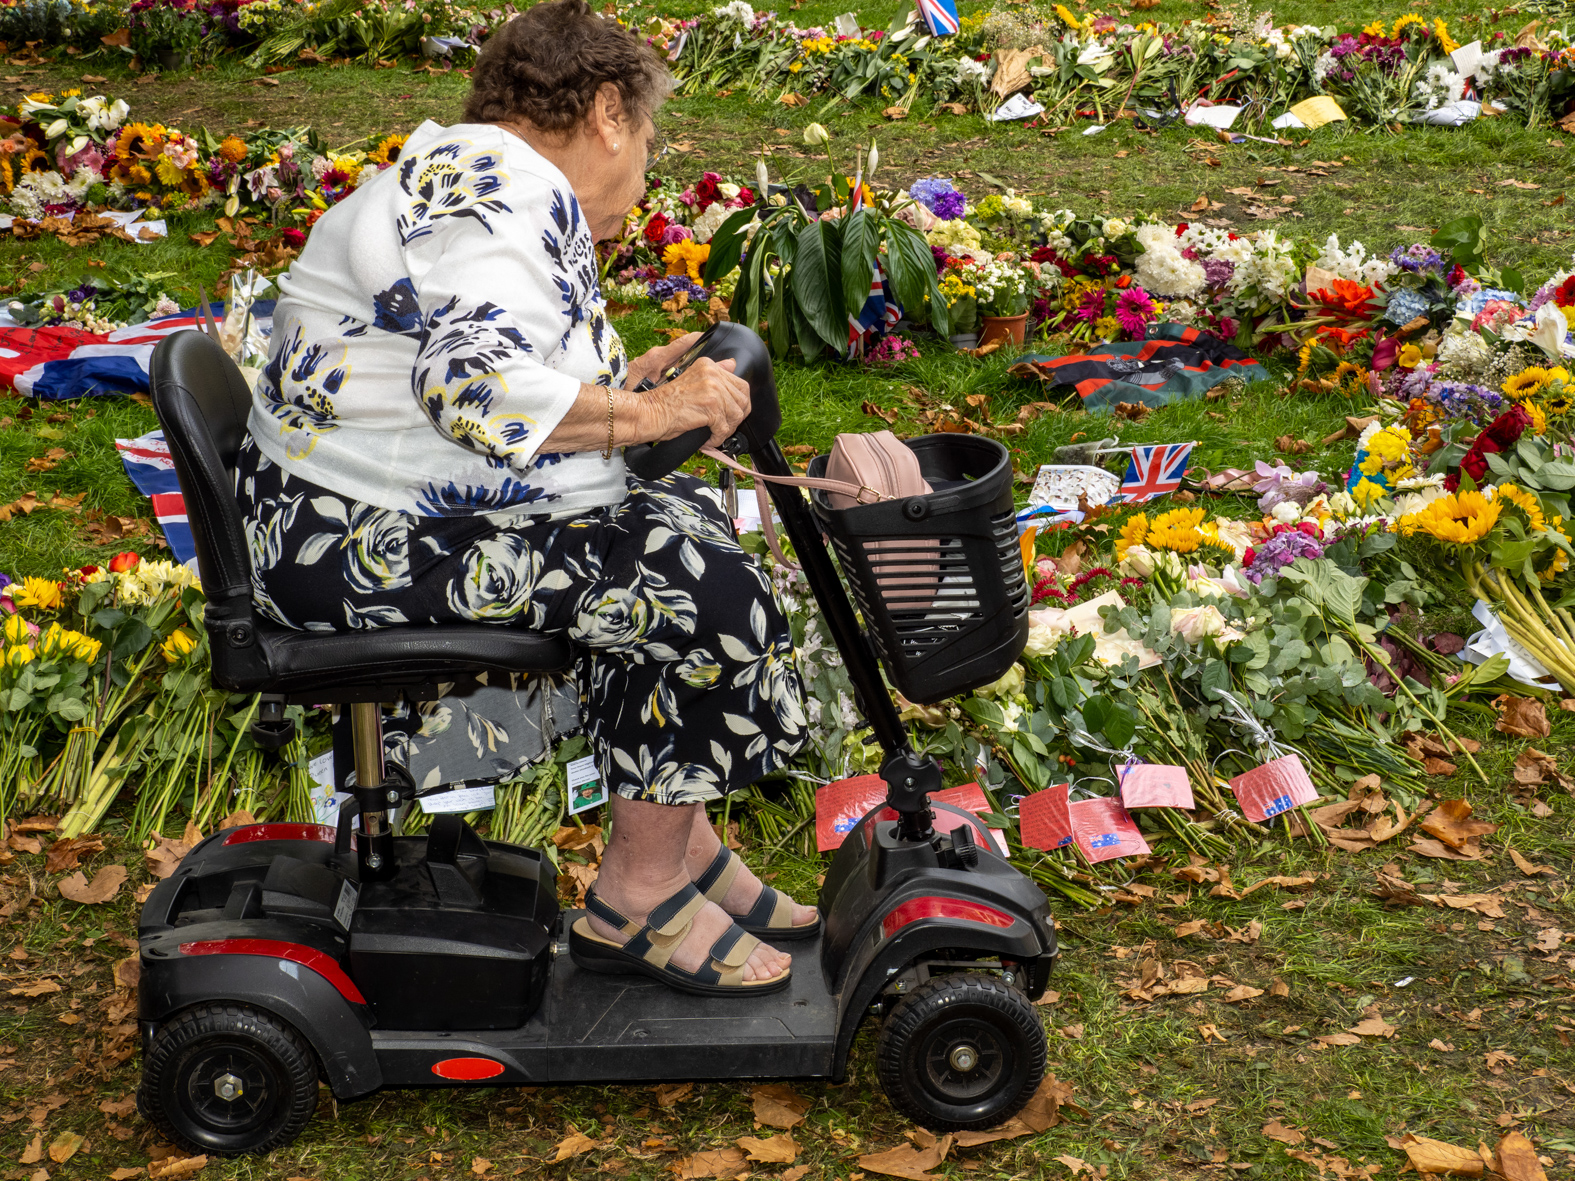 Visitors pay their respects at a temporary memorial garden in Green Park on 12th September in London, United Kingdom following the death of Queen Elizabeth II. Tributes include drawings, cards and floral tributes in their thousands. Plastic wrappings were encouraged to be disposed of responsibly by the public and also removed by volunteers and Royal Parks staff. King Charles III is known to be averse to the use of plastic in this way. (photo by Peter Dench/Getty Images)